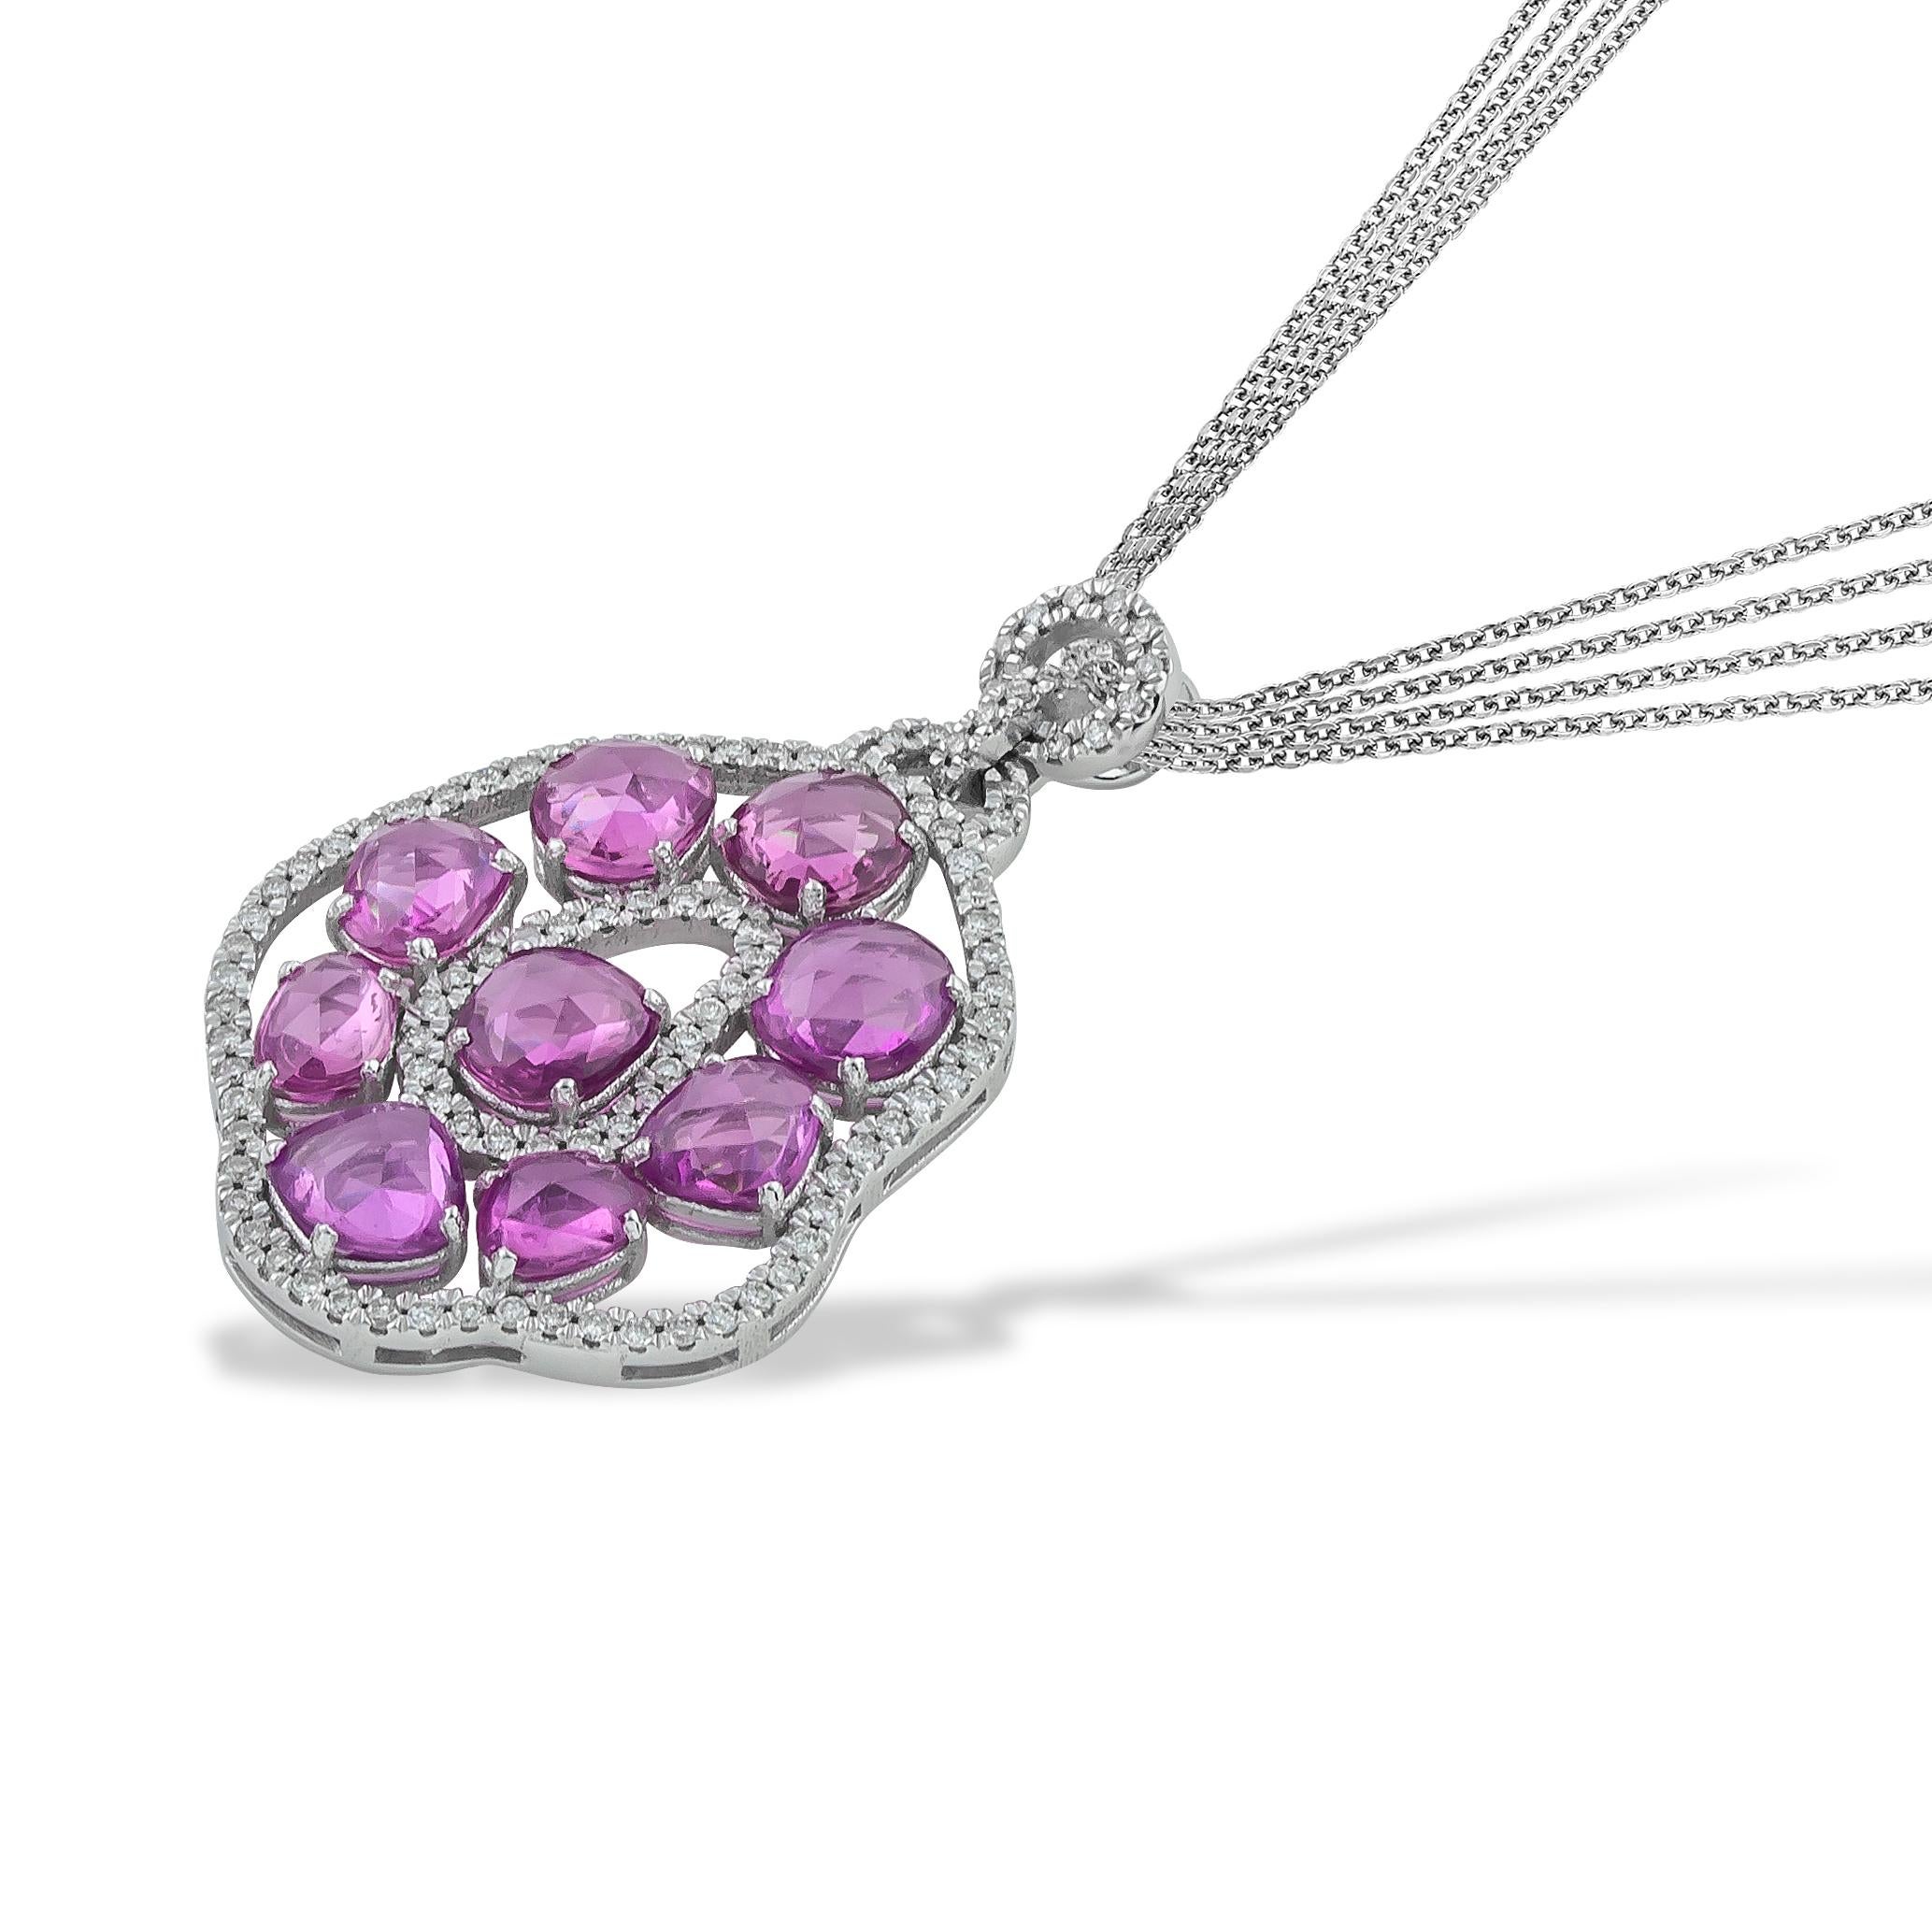 Fluid Silhouette and Organic Shapes Oval Pink Sapphire Pendant - Necklace set with diamonds in 18kt white gold. This rose cut pink sapphire necklace comes with Multi Chain ( x4 diamond cut rolo chain) in 18kt White Gold.
Original, Elegant with a